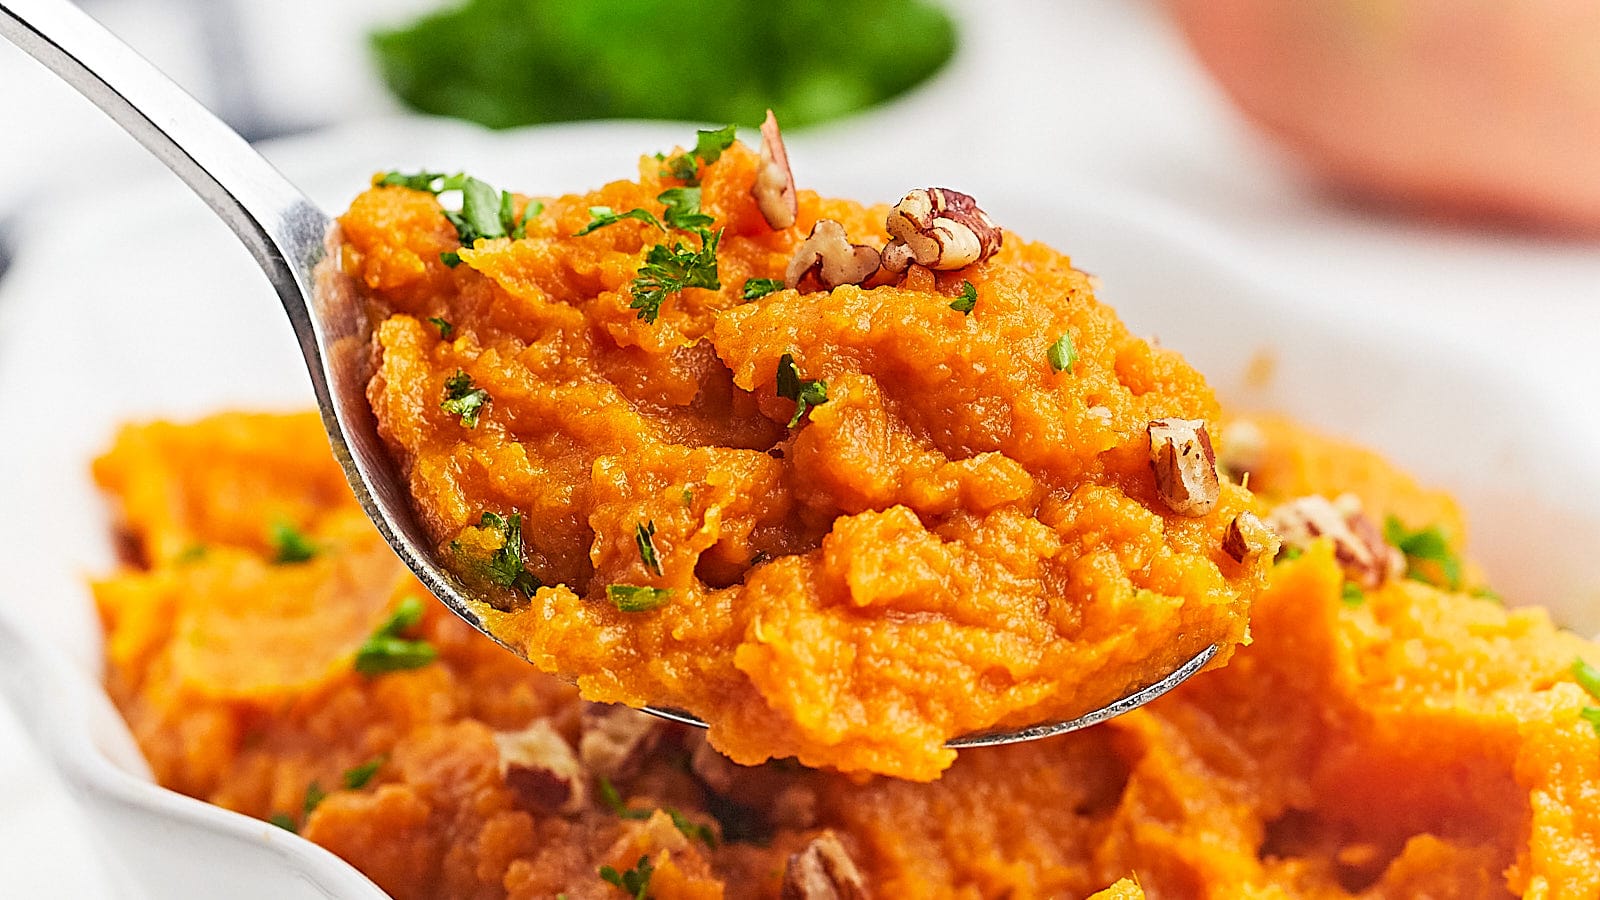 A spoon full of mashed sweet potatoes with pecans and parsley.